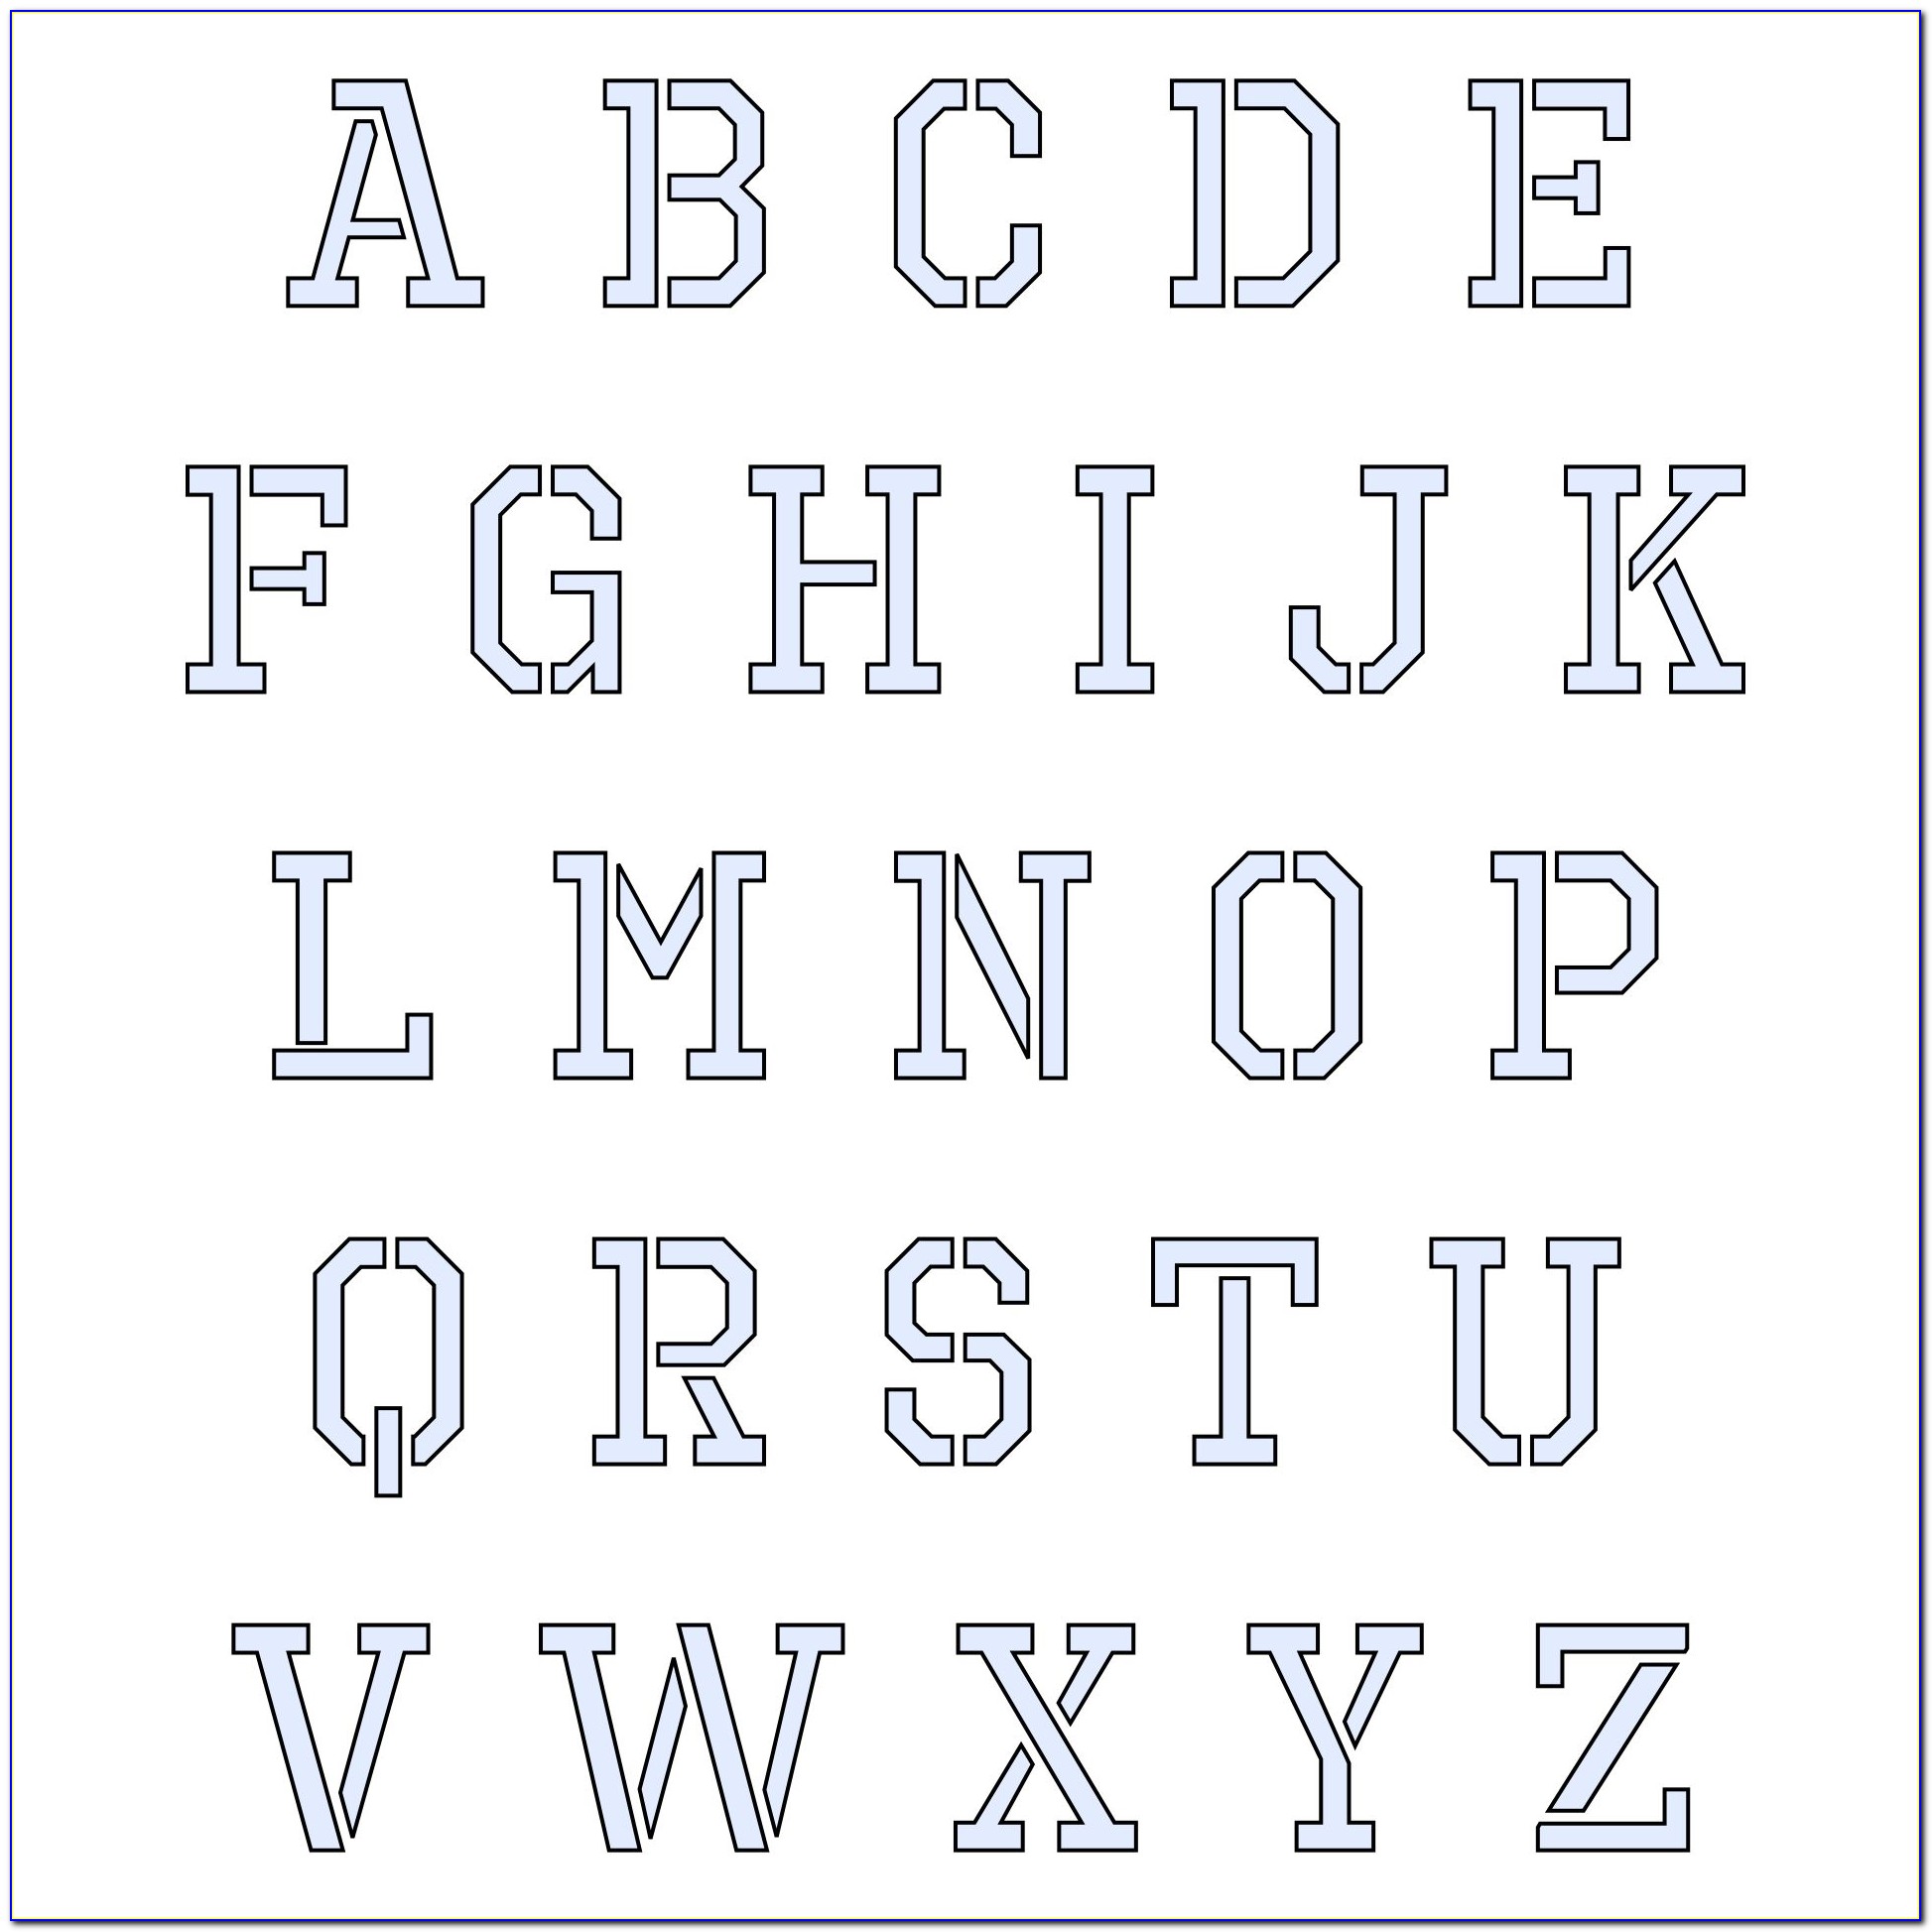 A4 Alphabet Letters To Print And Cut Out